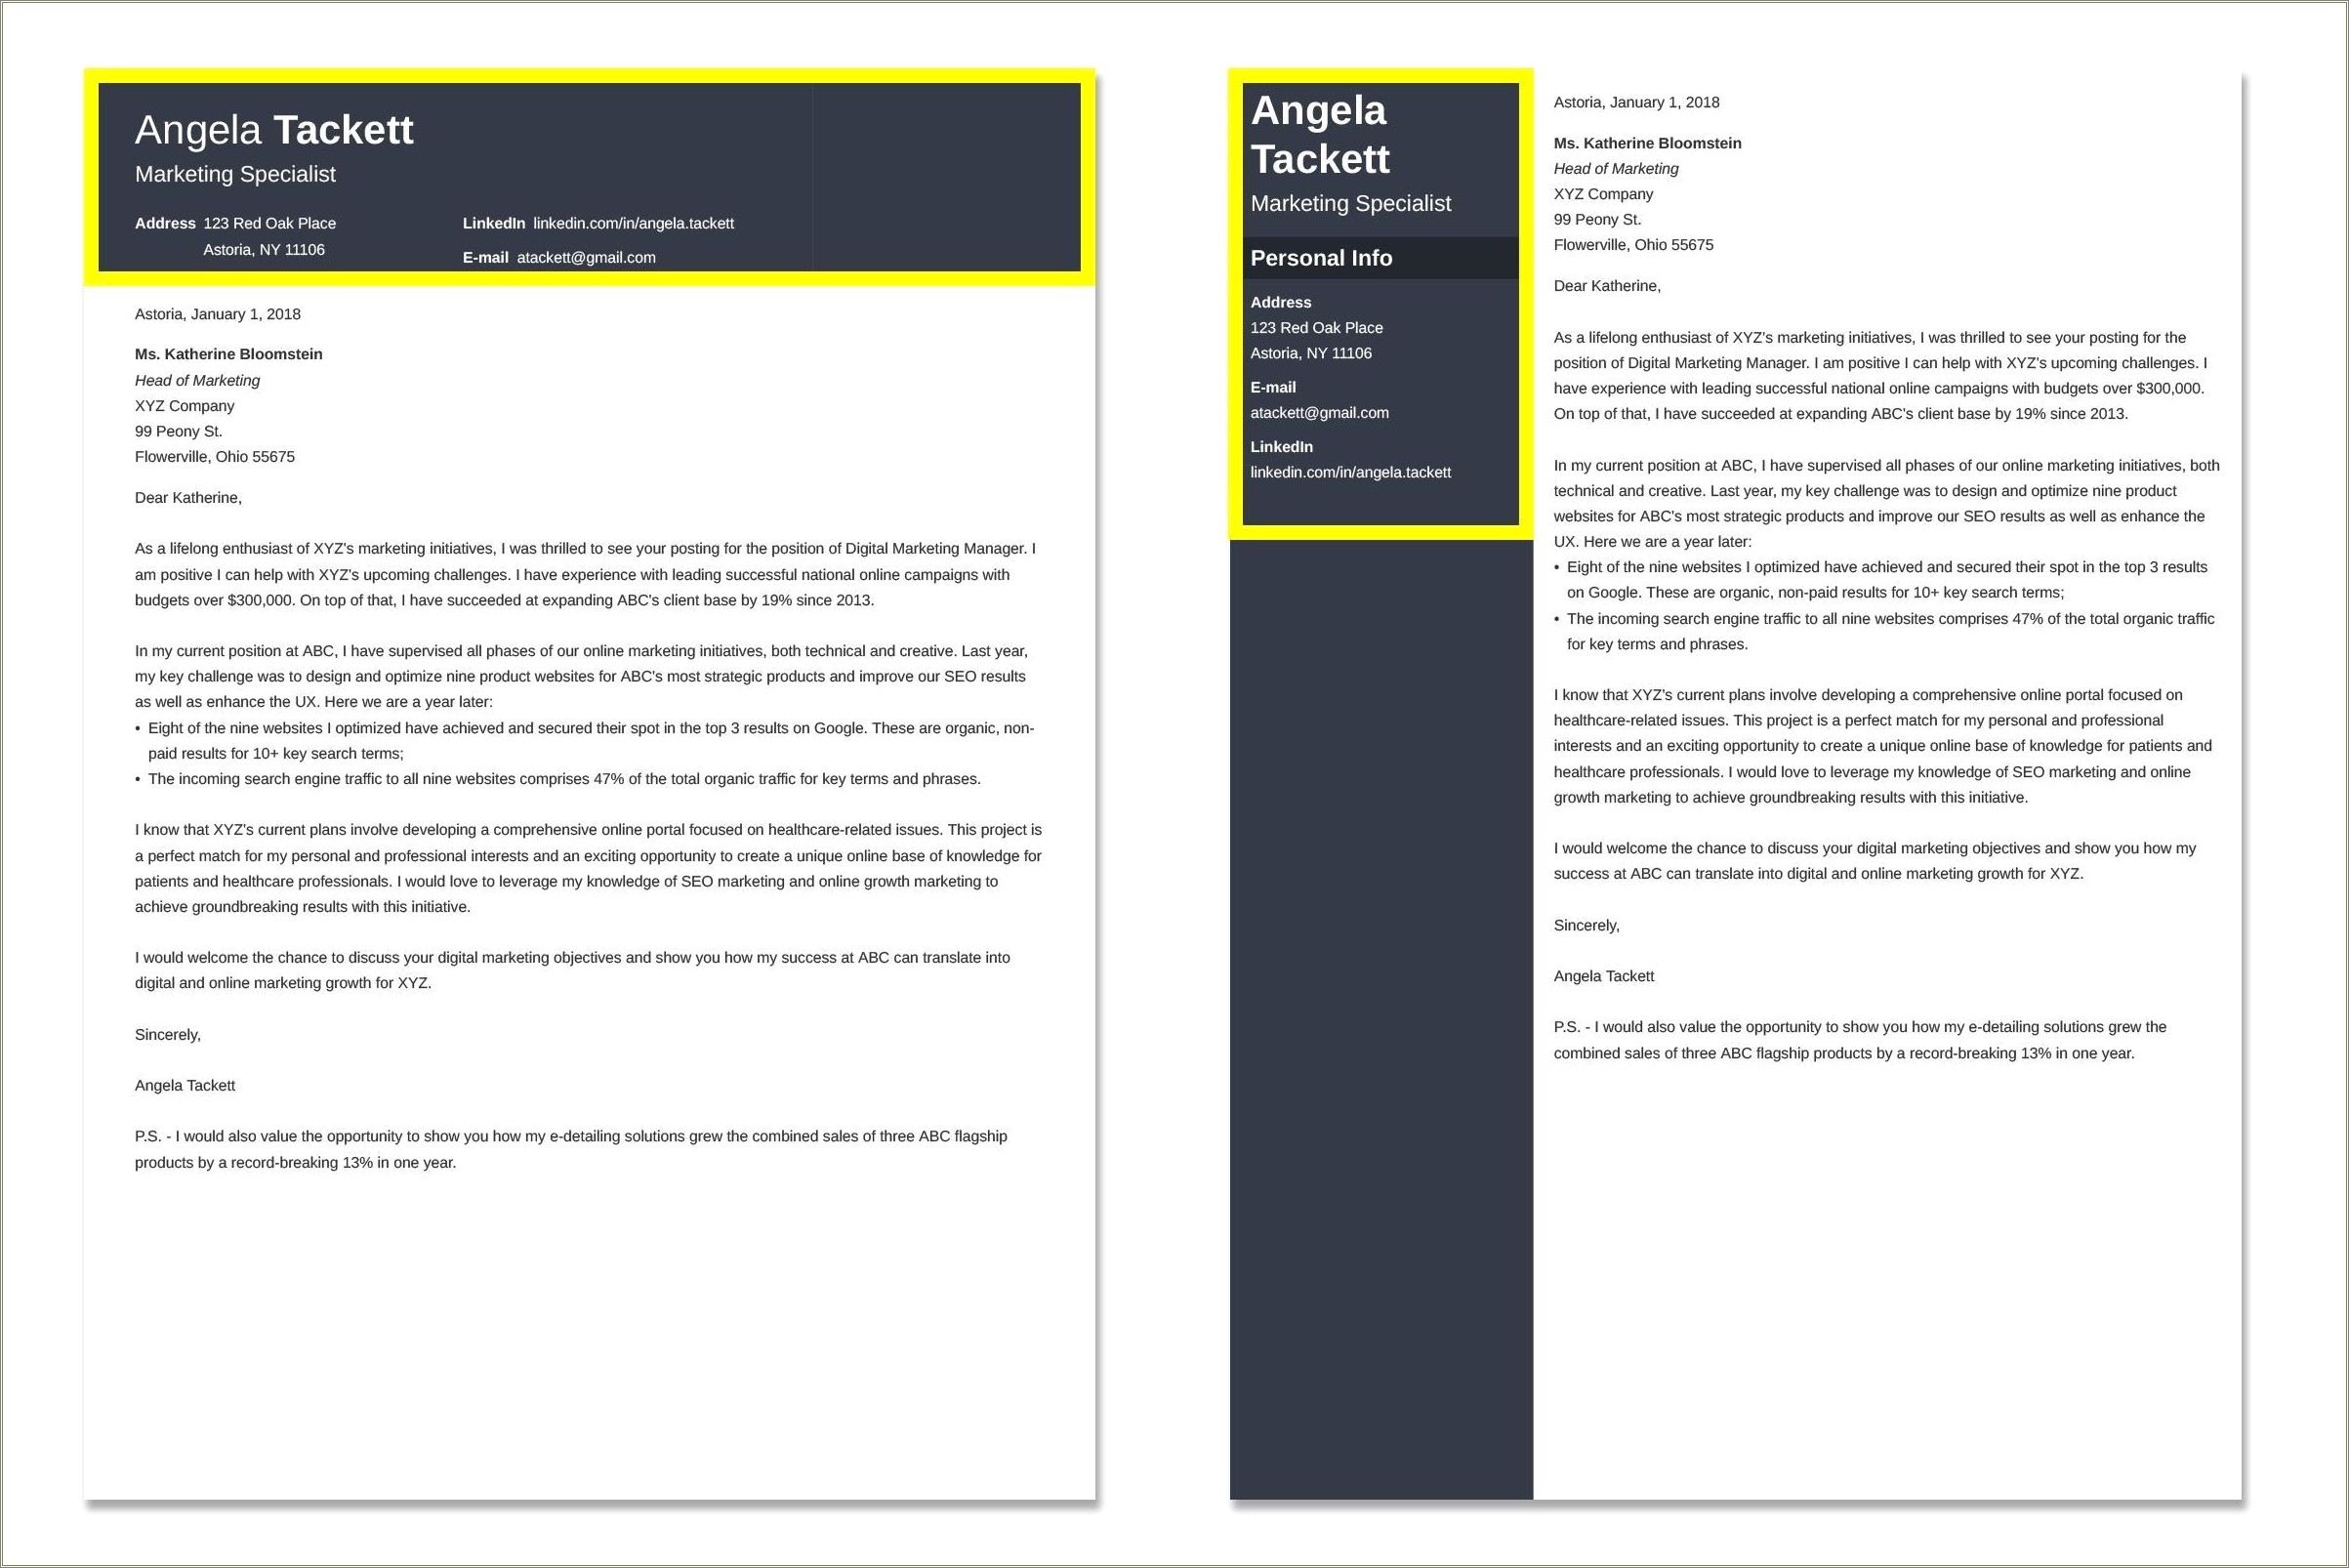 Free Administrative Assistant Cover Letter Templates